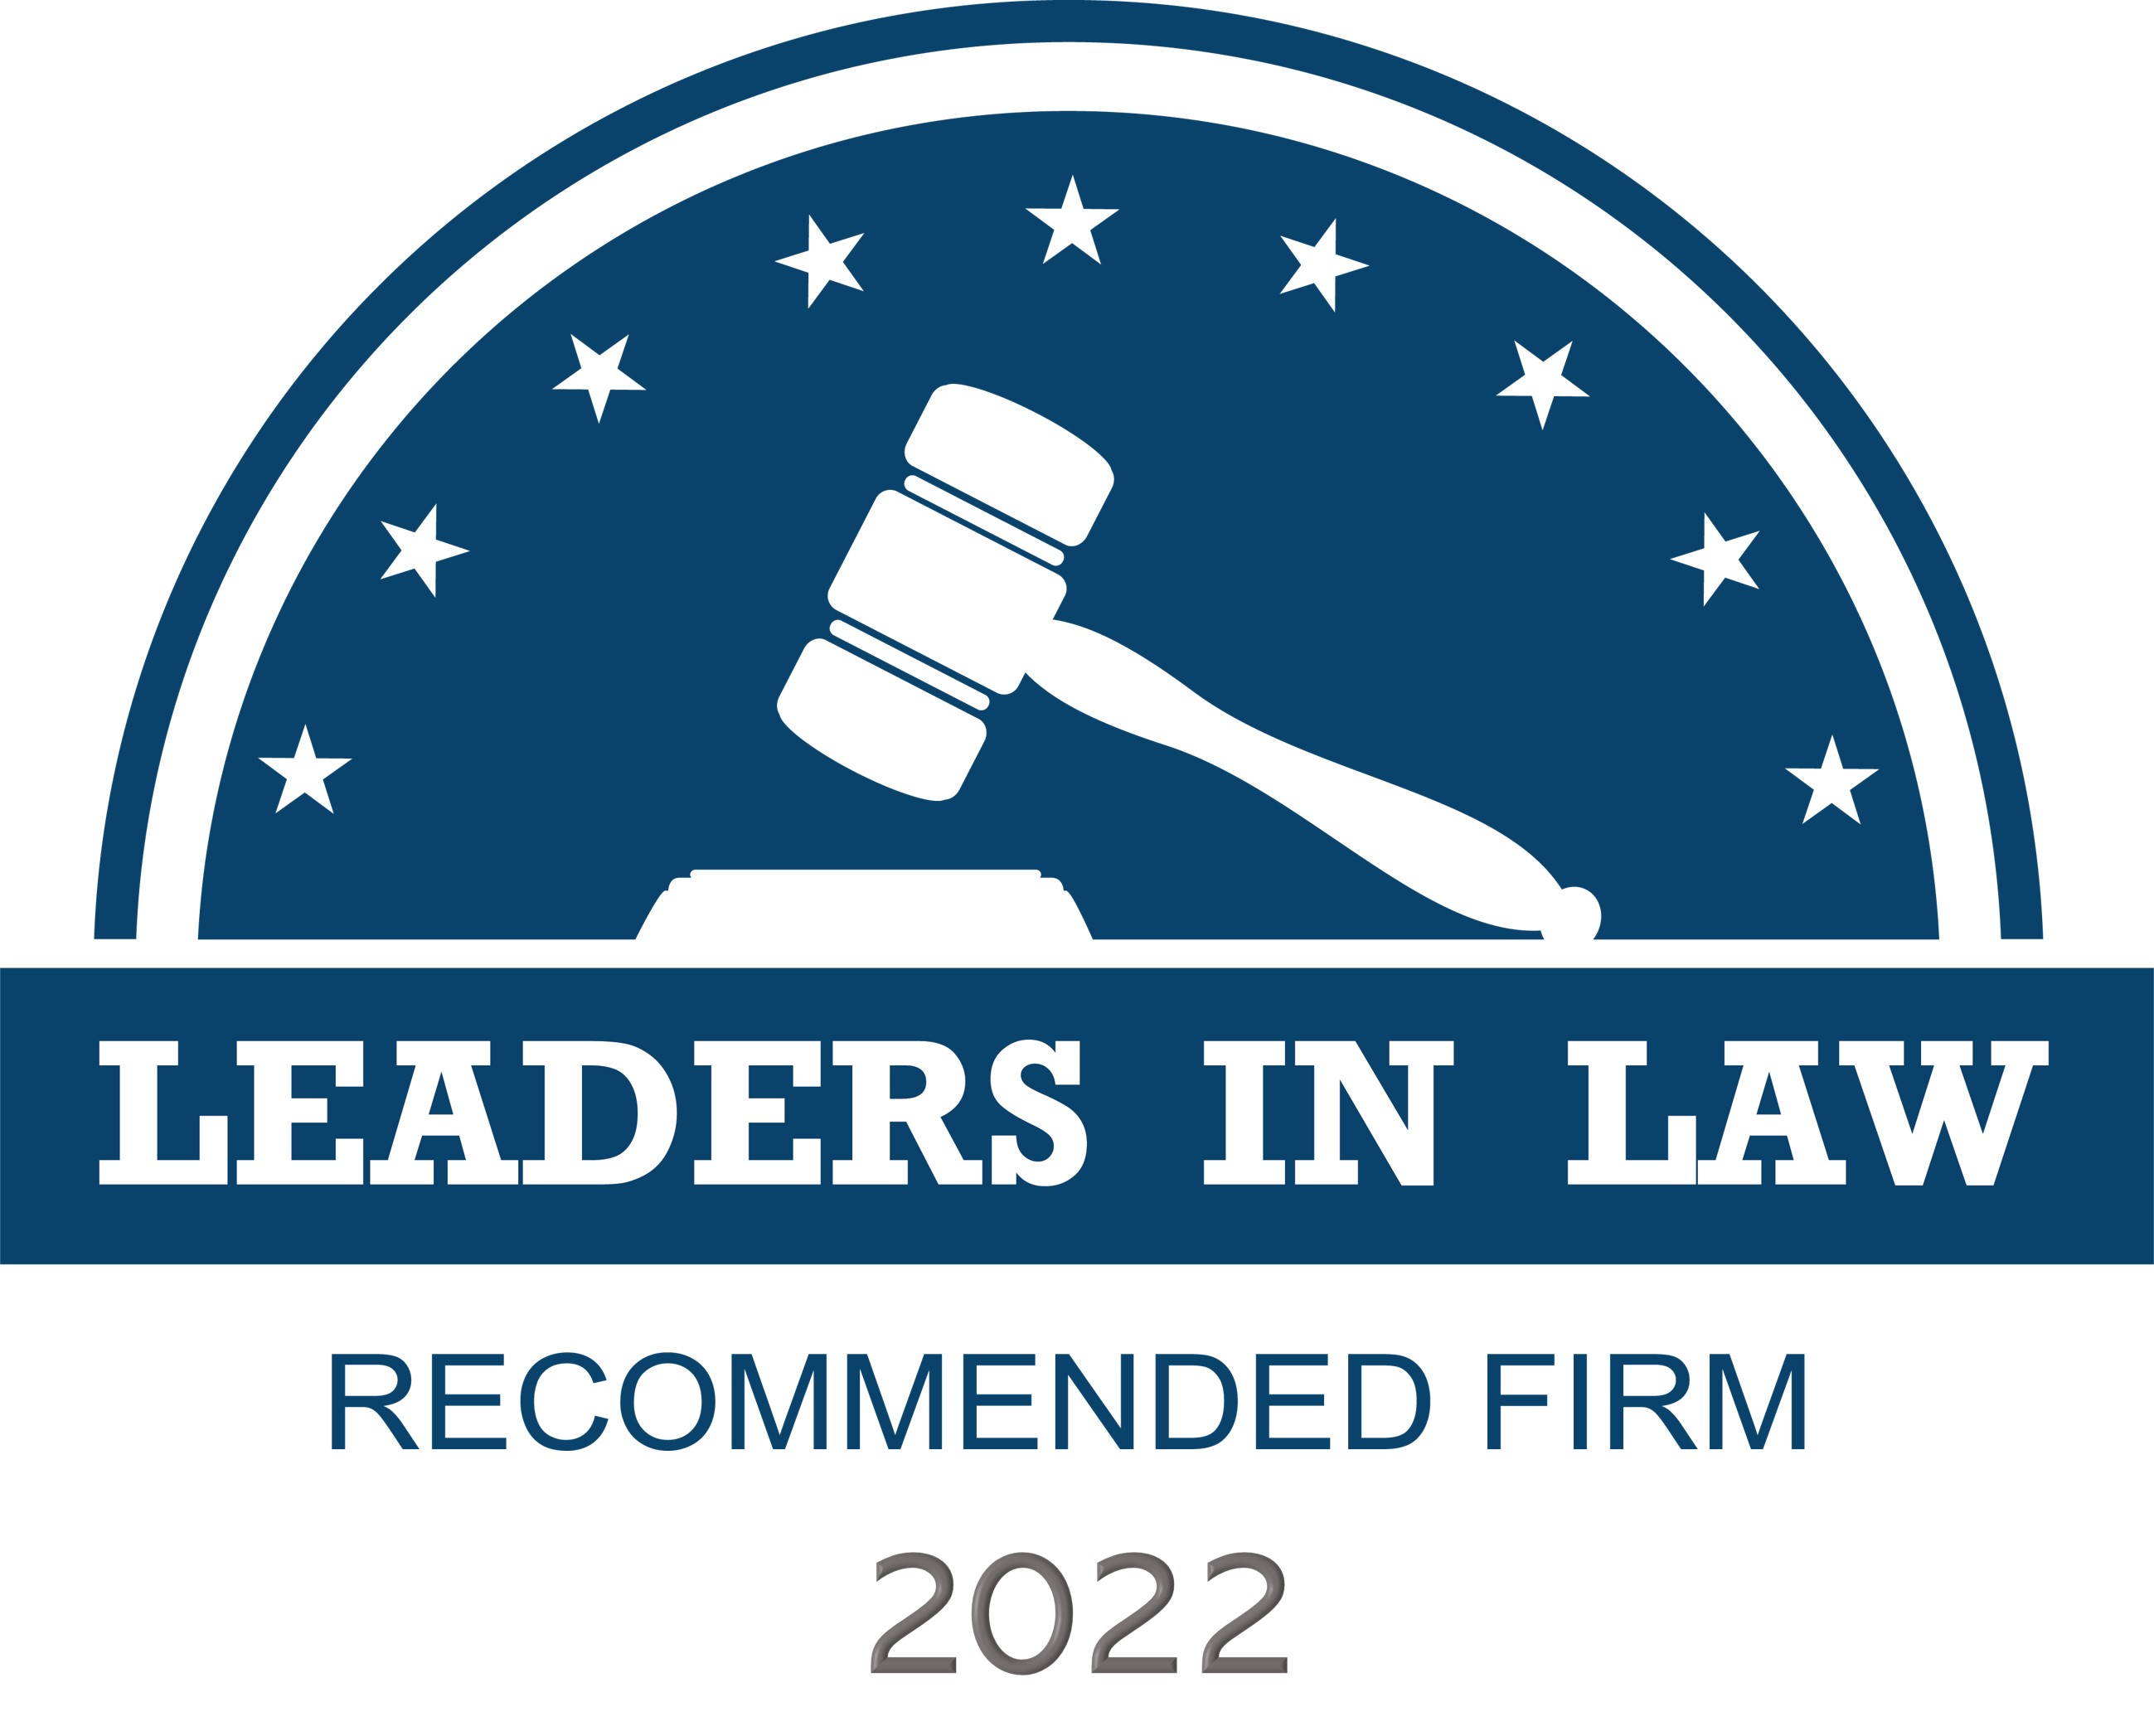 Named as an exclusive "Recommended M&A Firm" in Hong Kong by Leaders in Law 2022